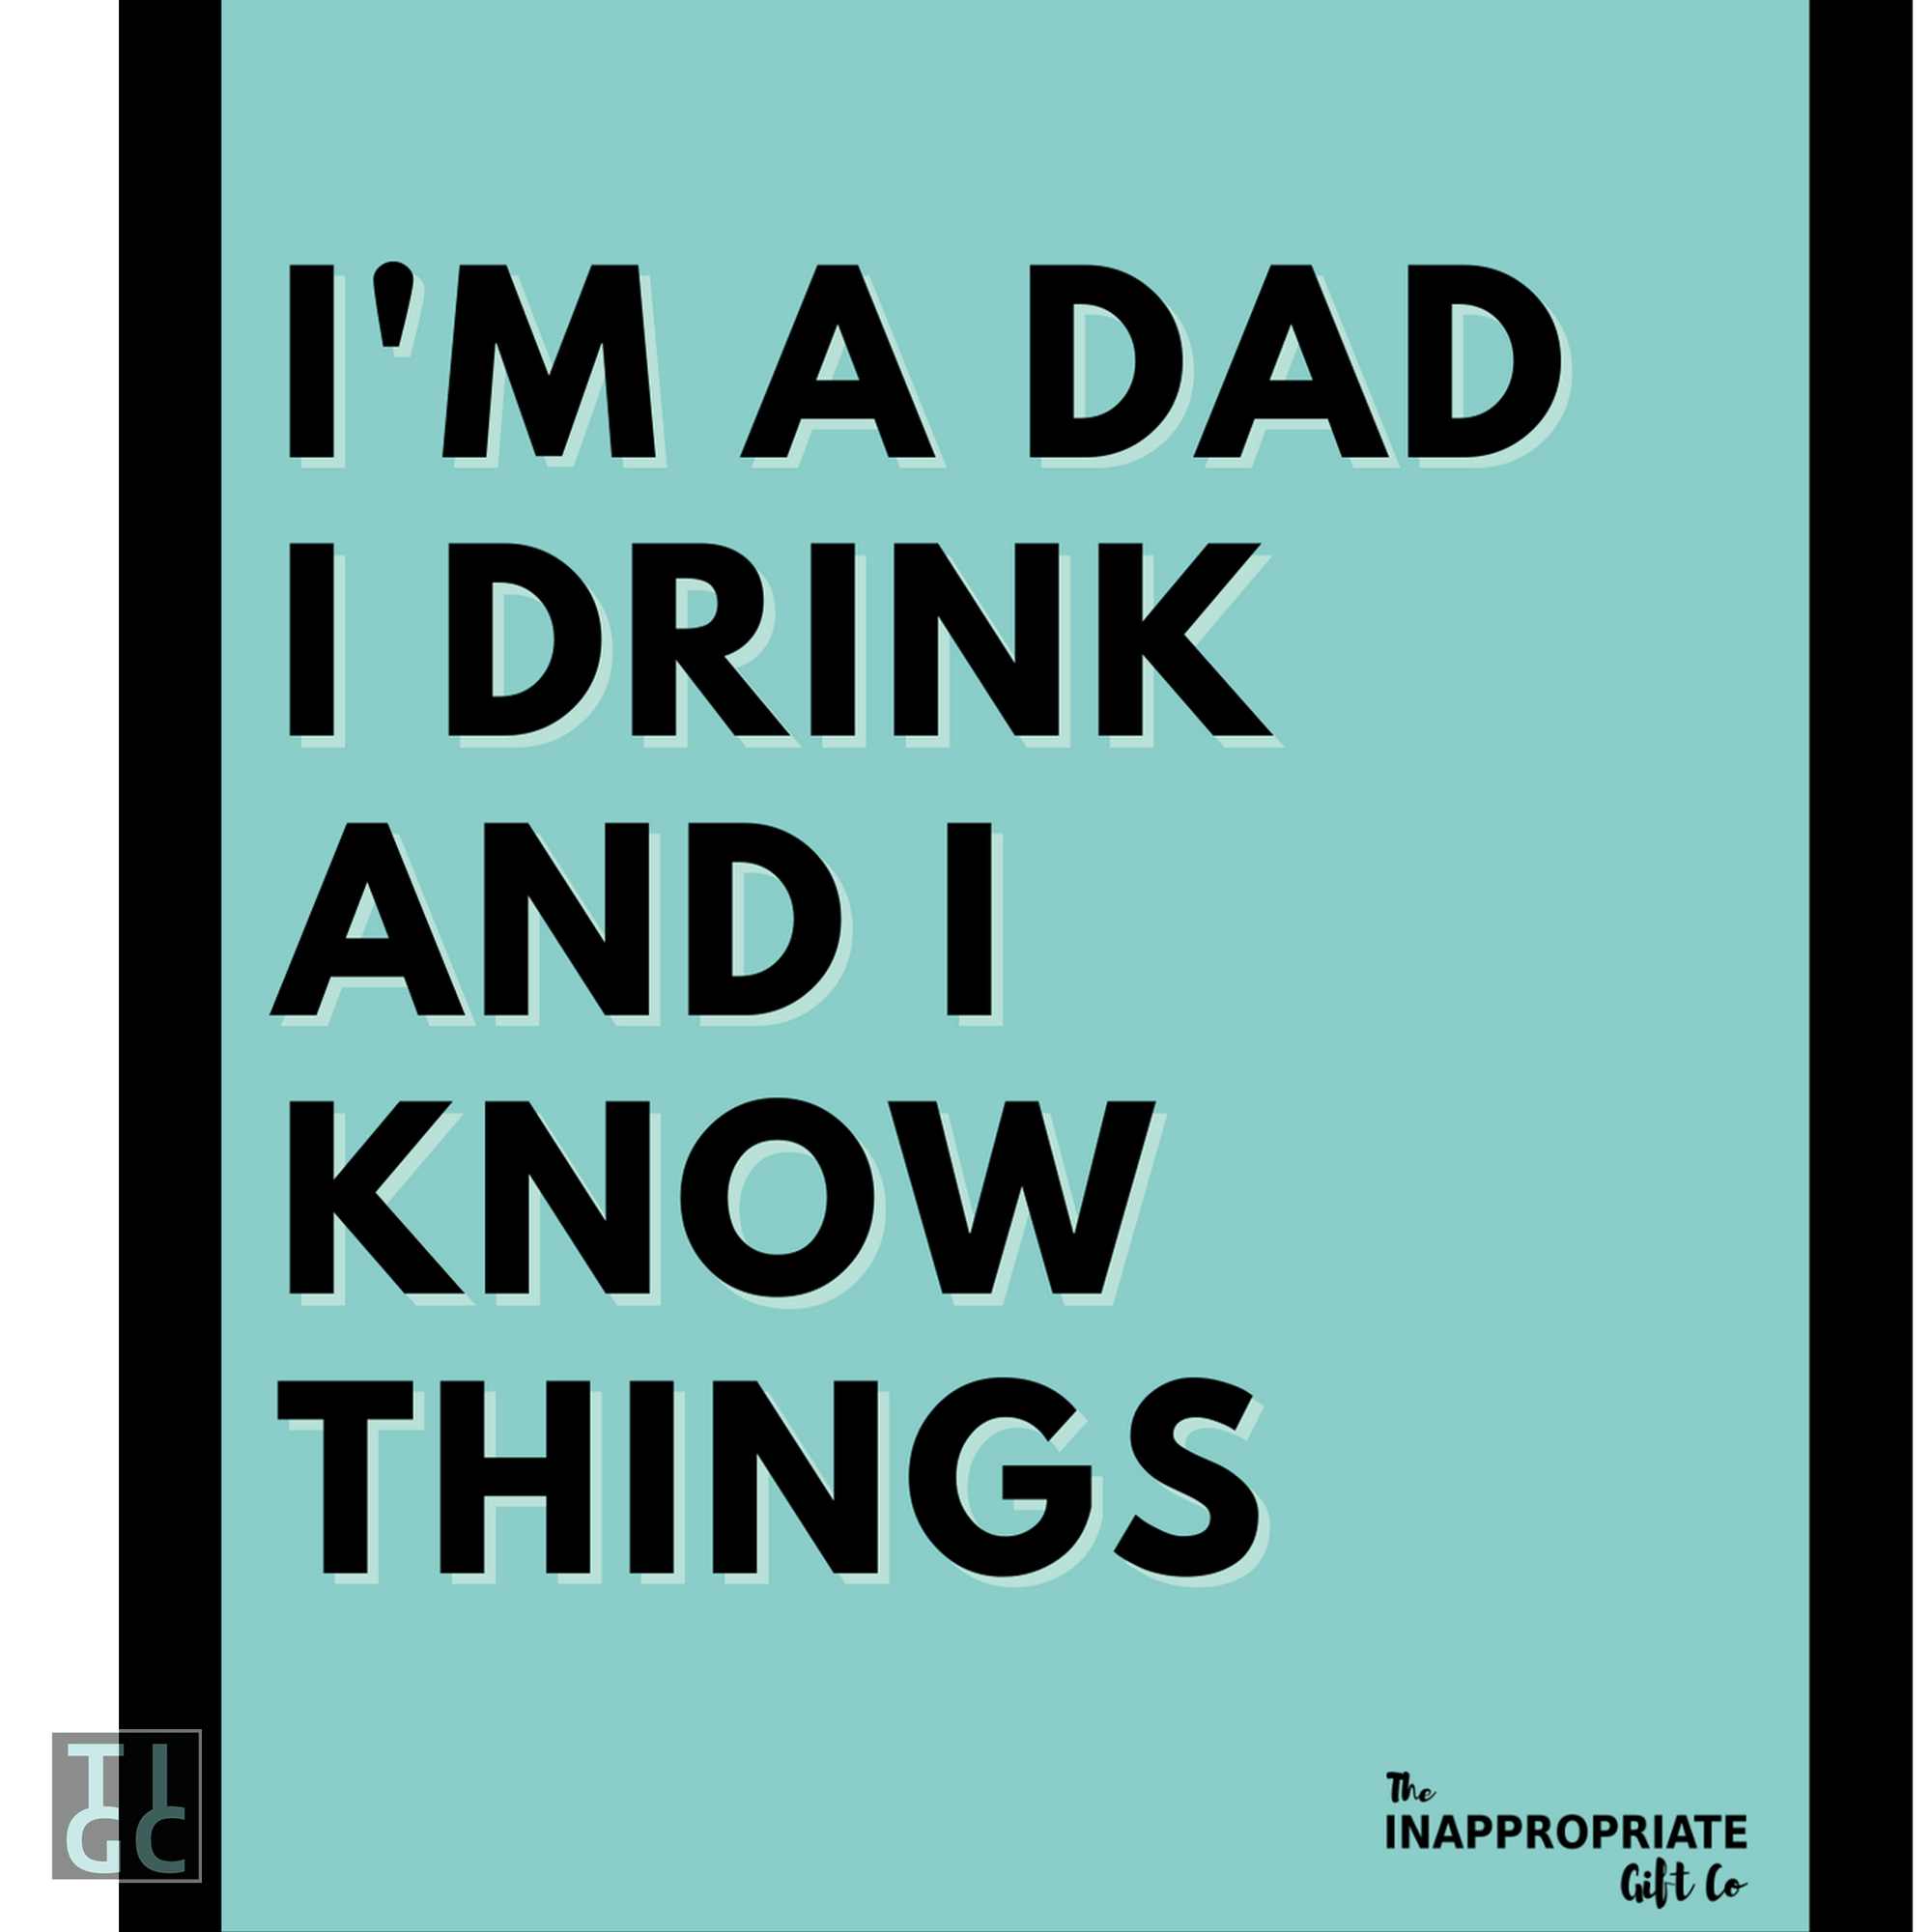 TIGC The Inappropriate Gift Co I'm a dad I drink and I know things wine label  (Digital Download Only)